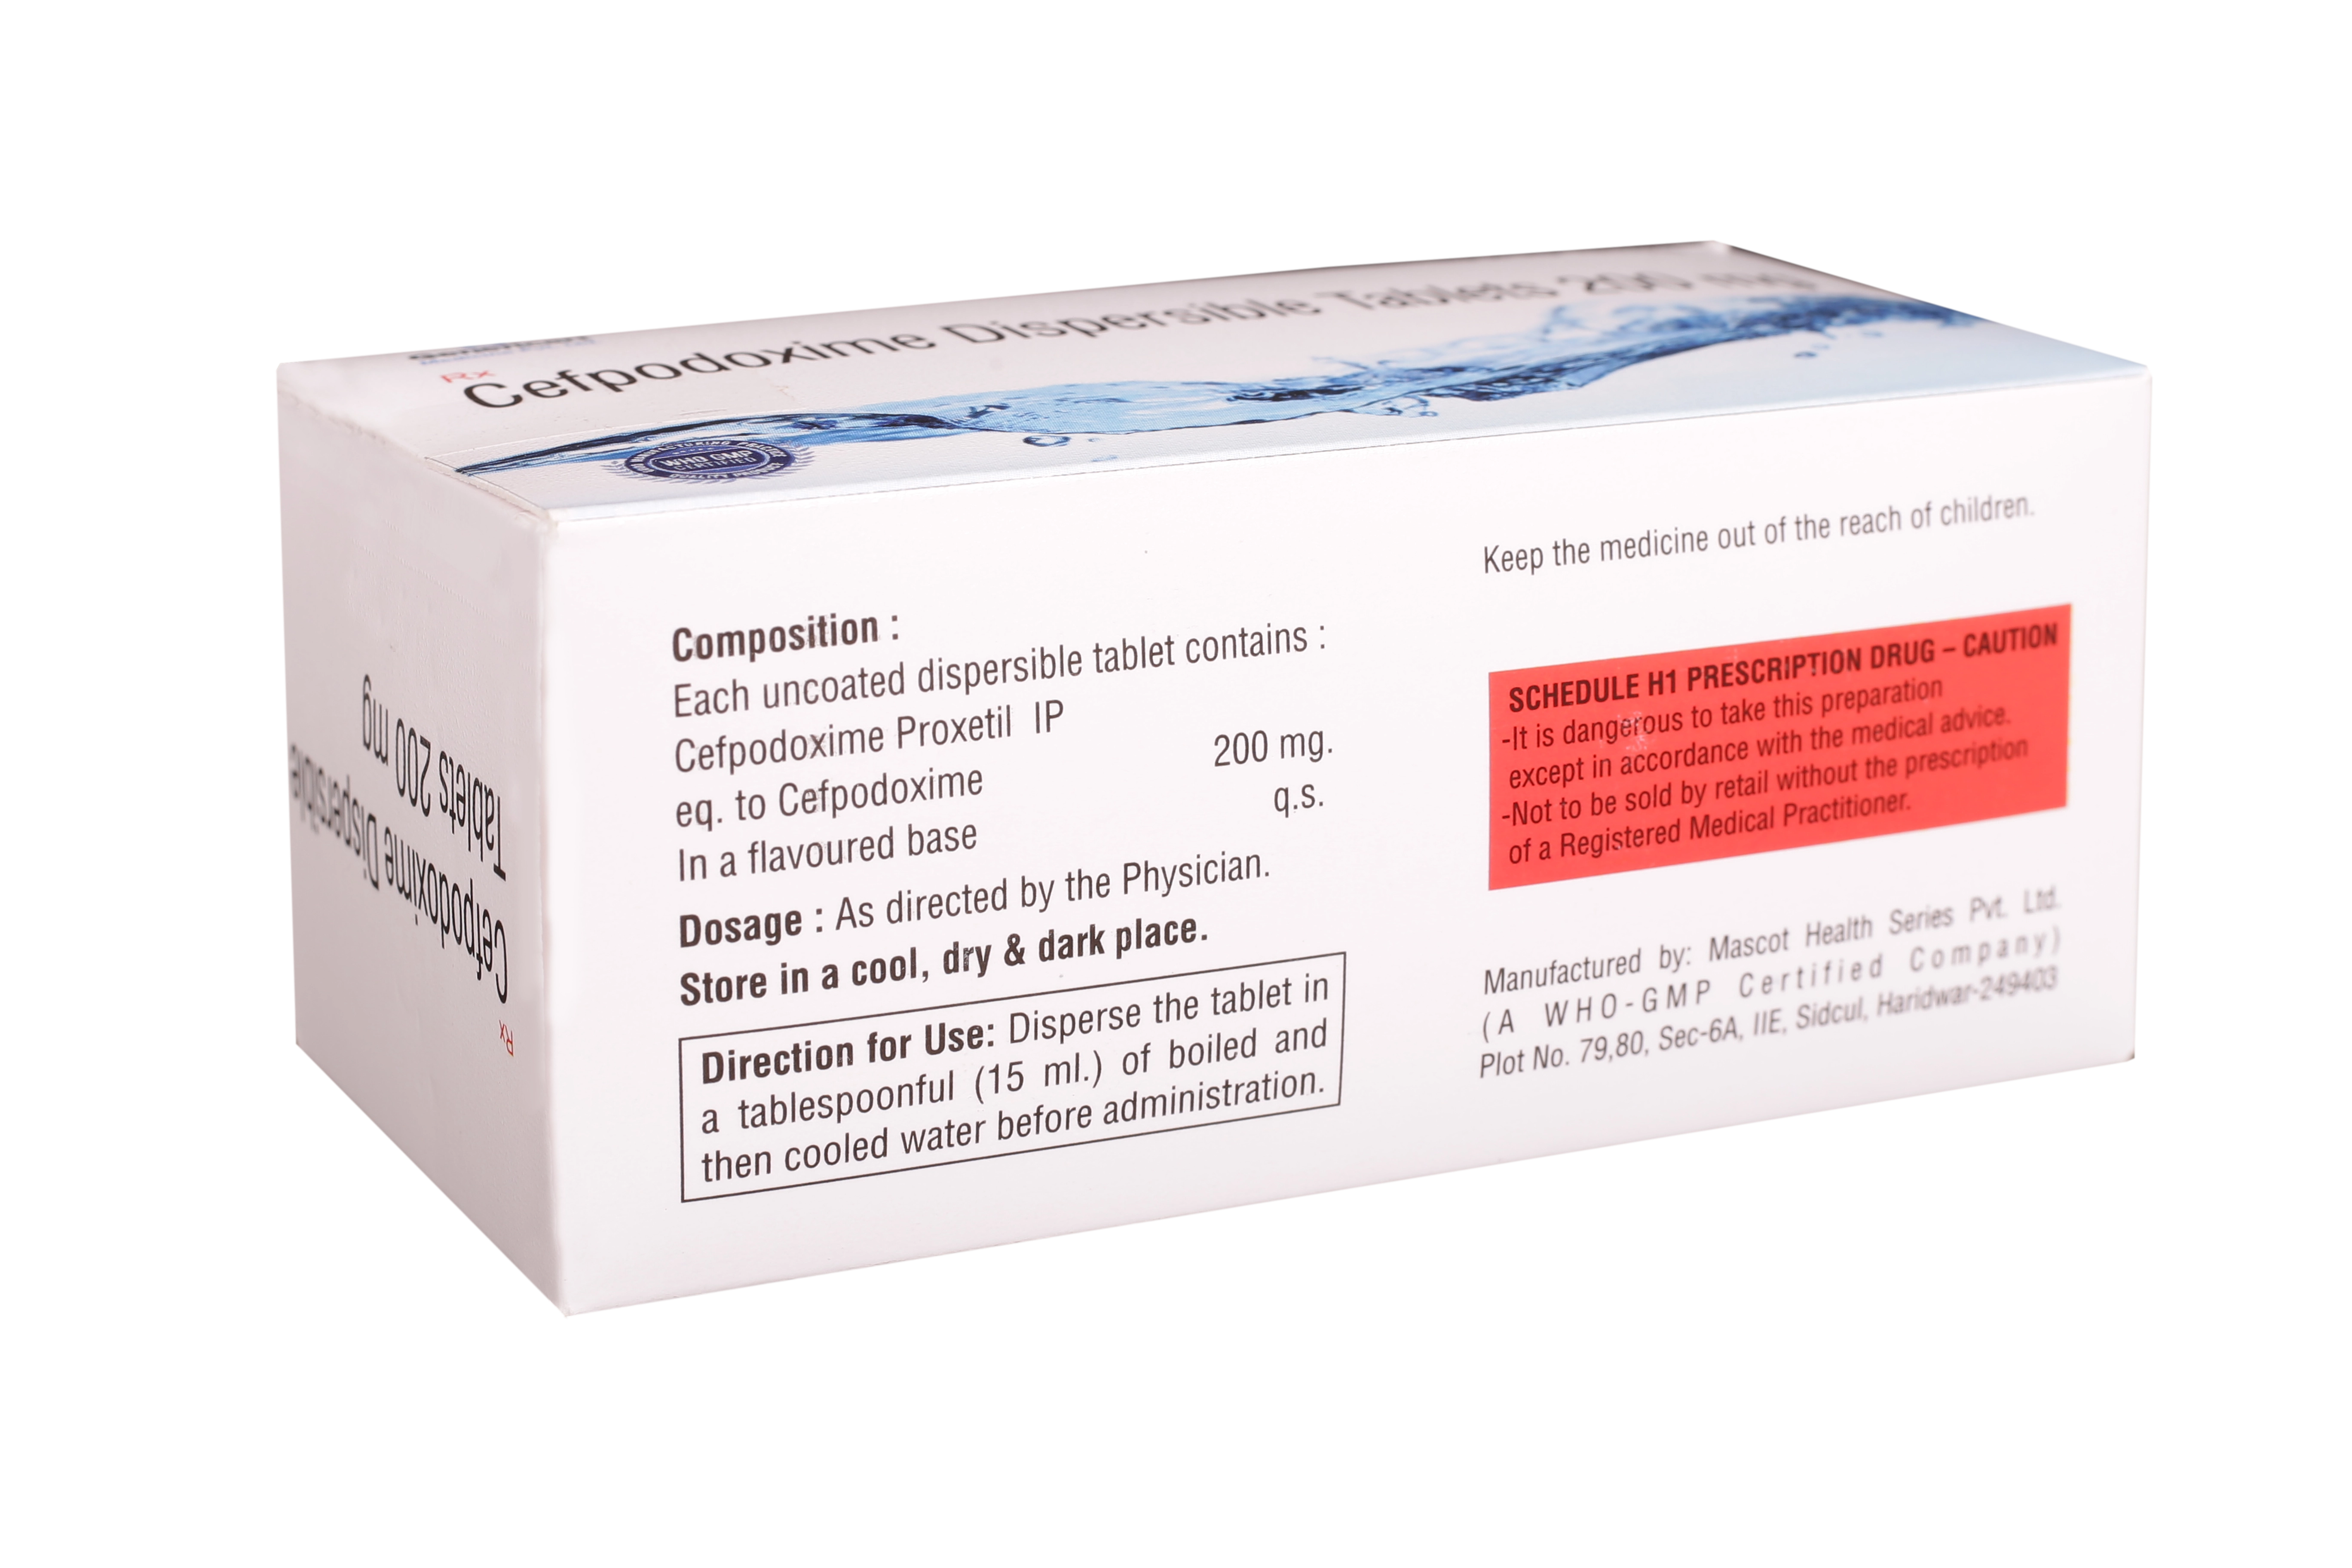 CEFPODOXIME 200 MG - Genericart Products